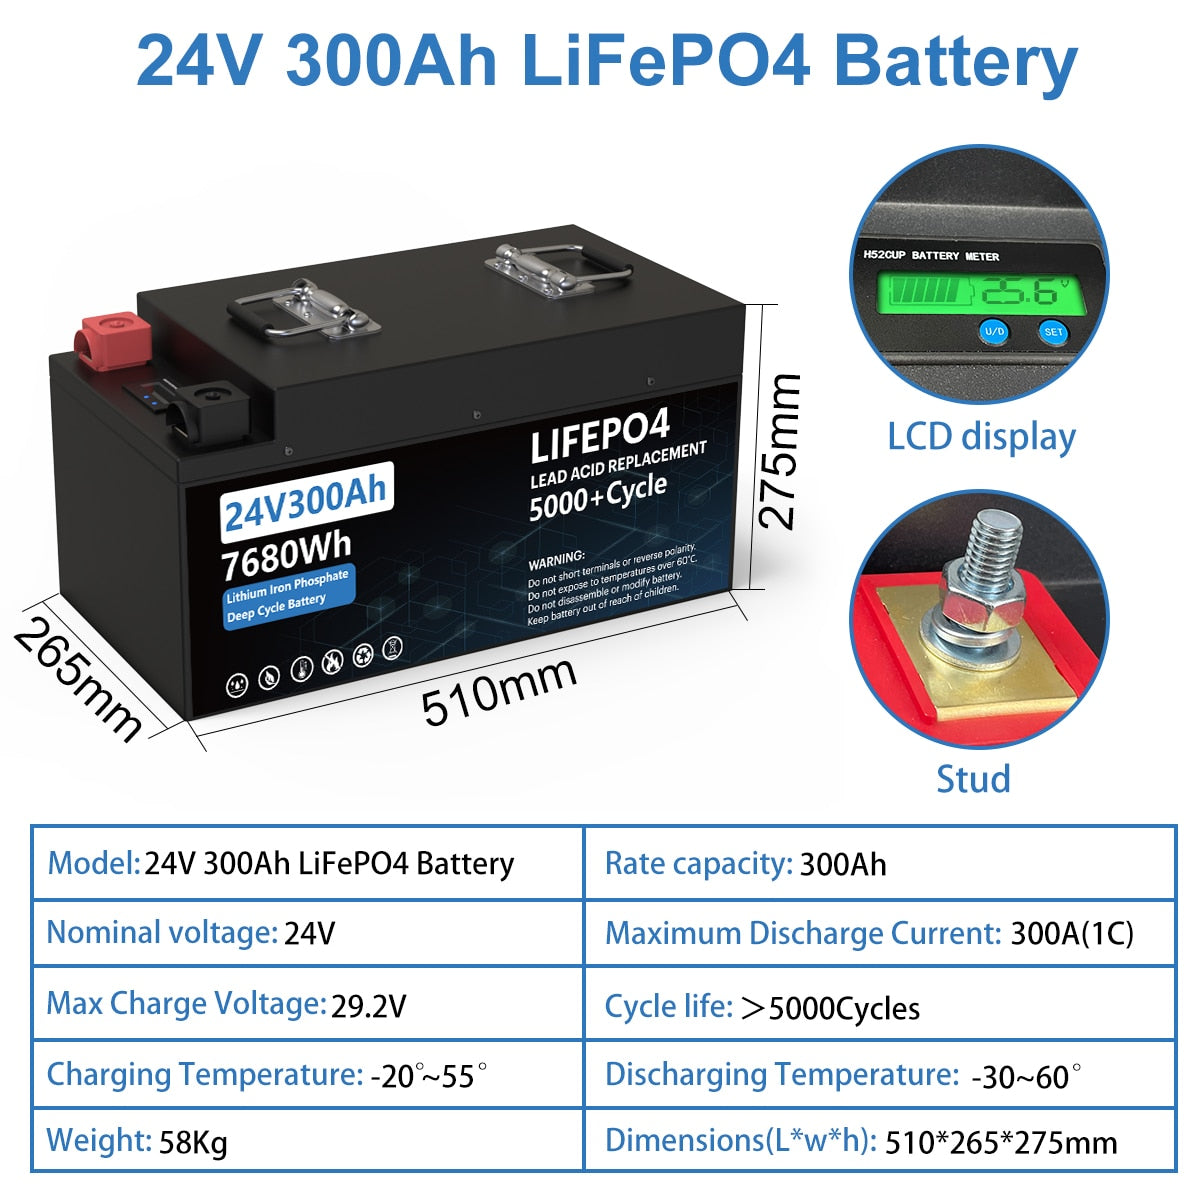 LiFePO4 24V 200AH Battery Pack - 240AH Lithium Iron Phosphate Solar Batteries Grand A Cells Built-in 200A BMS For RV Boat NO TAX